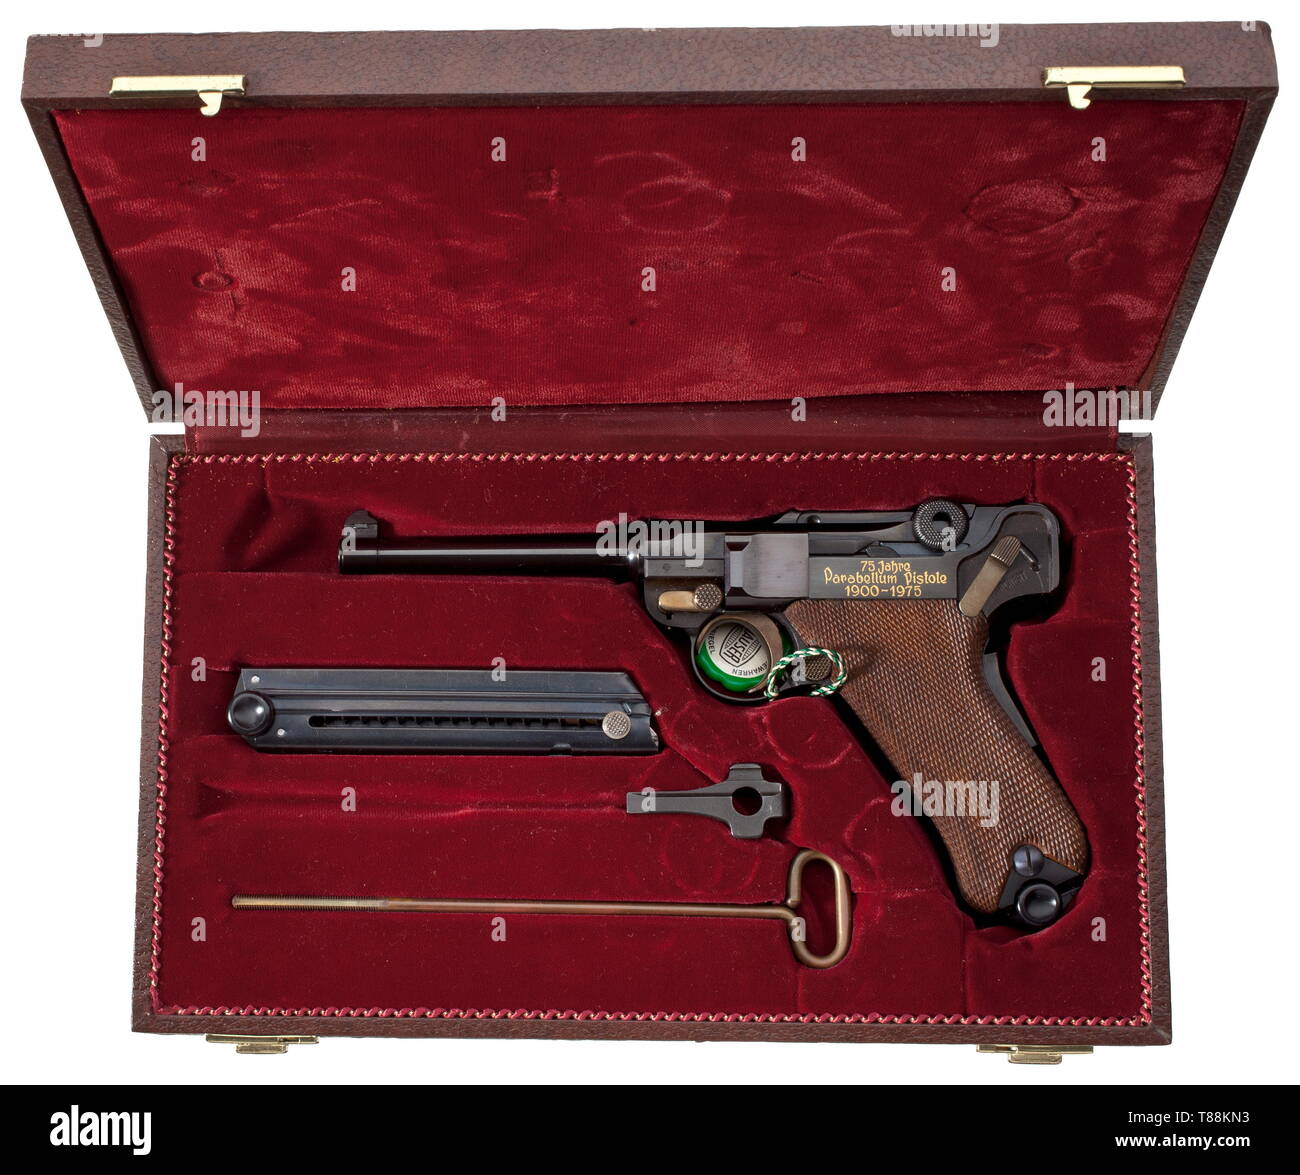 A Mauser Parabellum, commemorative model '75 Jahre Parabellum-Pistole', in casket Cal. 7.65 Parabellum, no. 185/250. Bright bore, length 120 mm. Proof-marked 1973(!). Grip safety. On chamber etched engraving of Swiss cross inside corona, on front toggle link Mauser barrel. On left side of frame inlaid in gold '75 Jahre / Parabellum - Pistole / 1900 - 1975'. Complete black highly polished finish. Operational parts strawed. Walnut grip panels. Magazine. Comes in dark brown Mauser imitation leather casket, dimensions 32 x 19 x 6 cm, lined with wine-, Additional-Rights-Clearance-Info-Not-Available Stock Photo